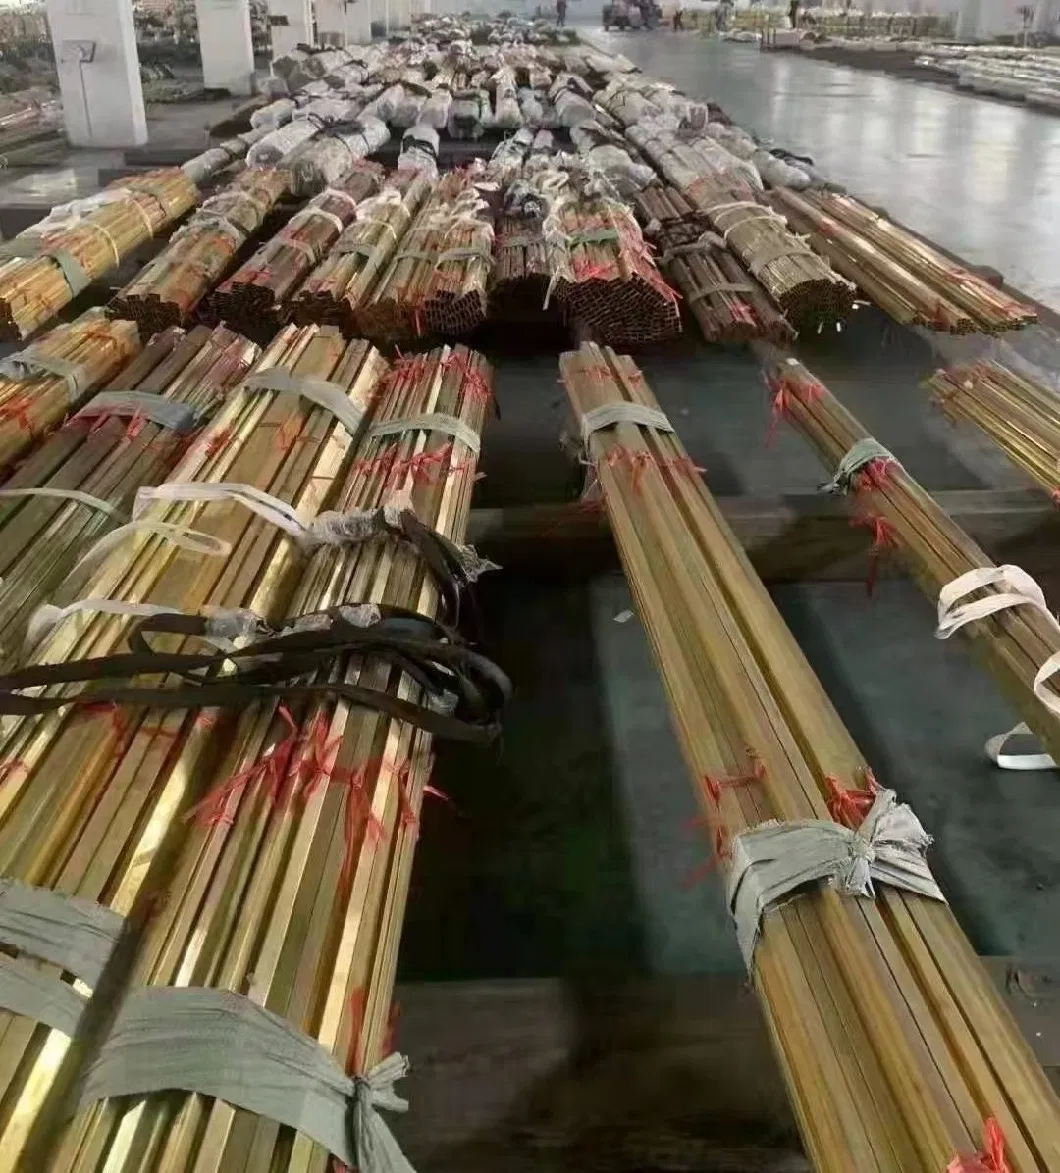 Brass Rod T27300 T27600 T28200 Low Lead Environmental Protection Brass Solid Round Rod Free Cutting Copper Rod